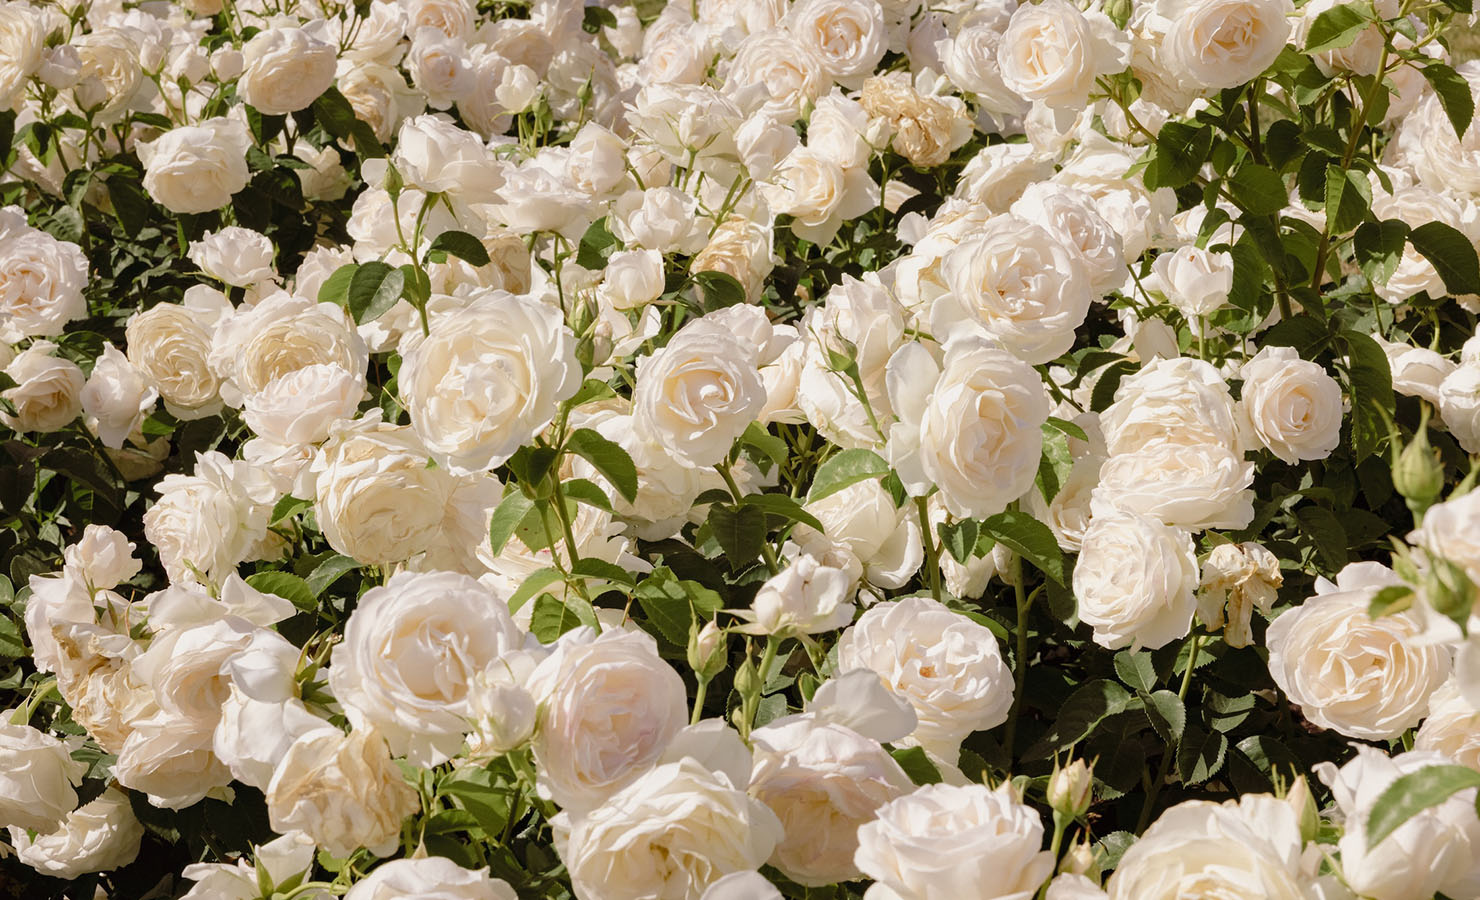 Roses in June - Celebrating National Rose Month with Fun Facts and Tips